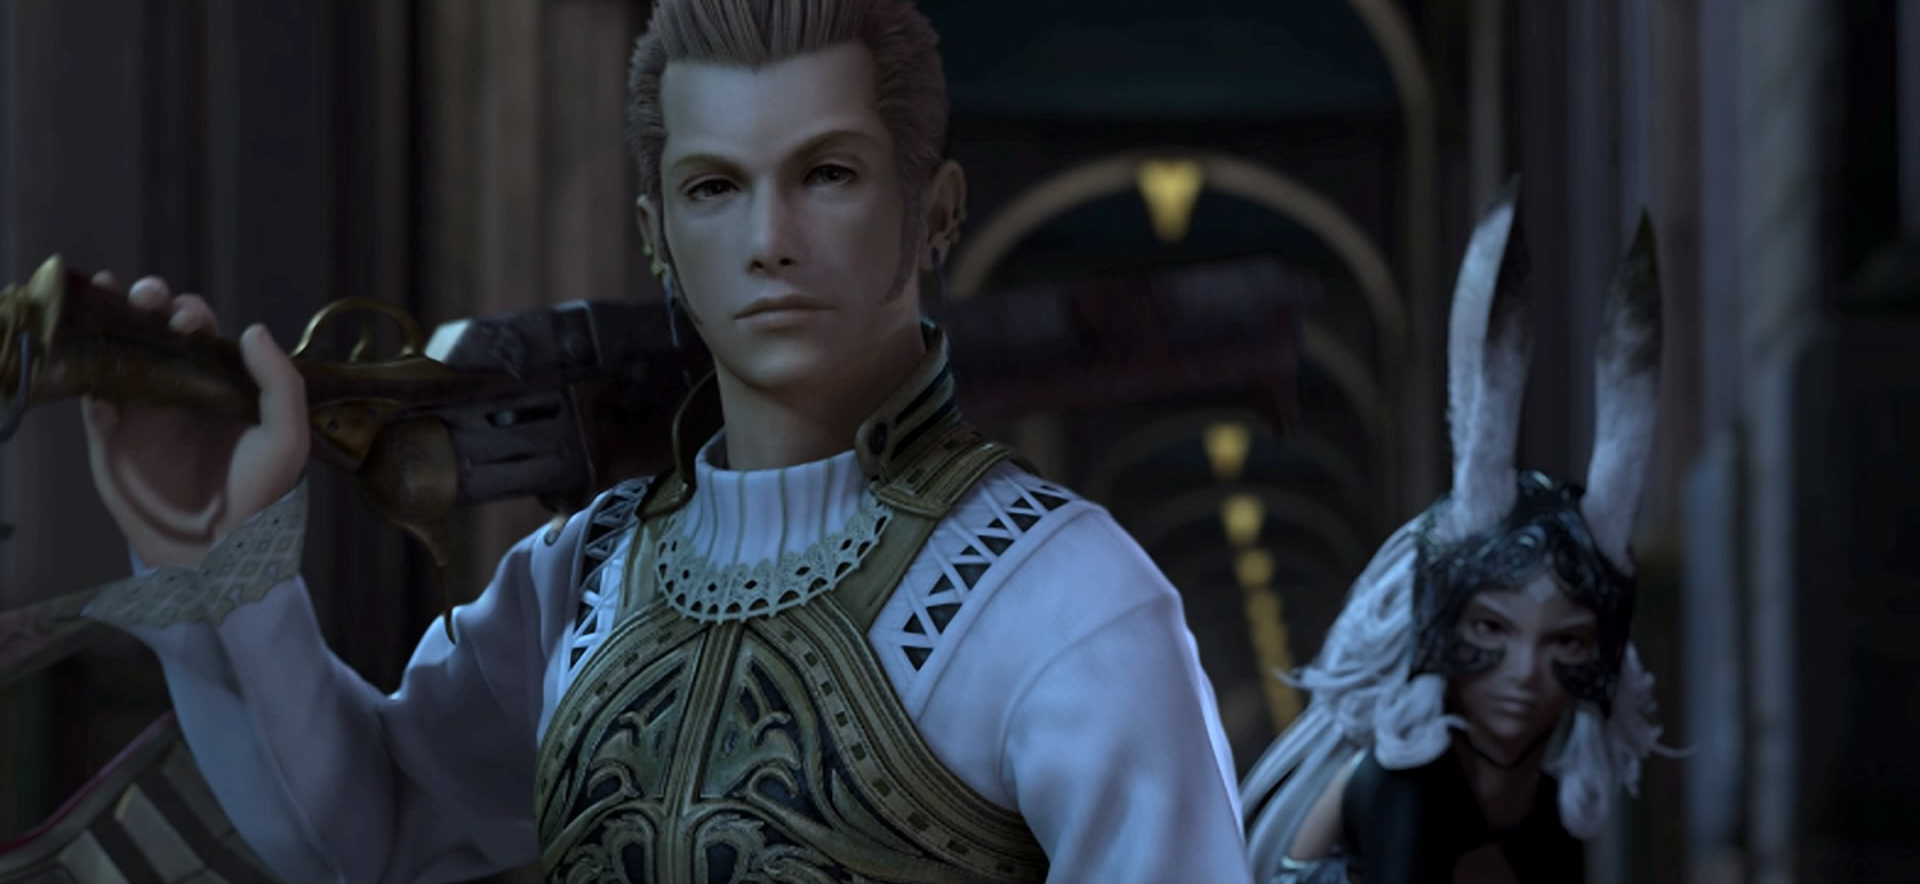 http://img1.wikia.nocookie.net/__cb20110814063629/finalfantasy/images/a/aa/Balthier_Fran.jpg